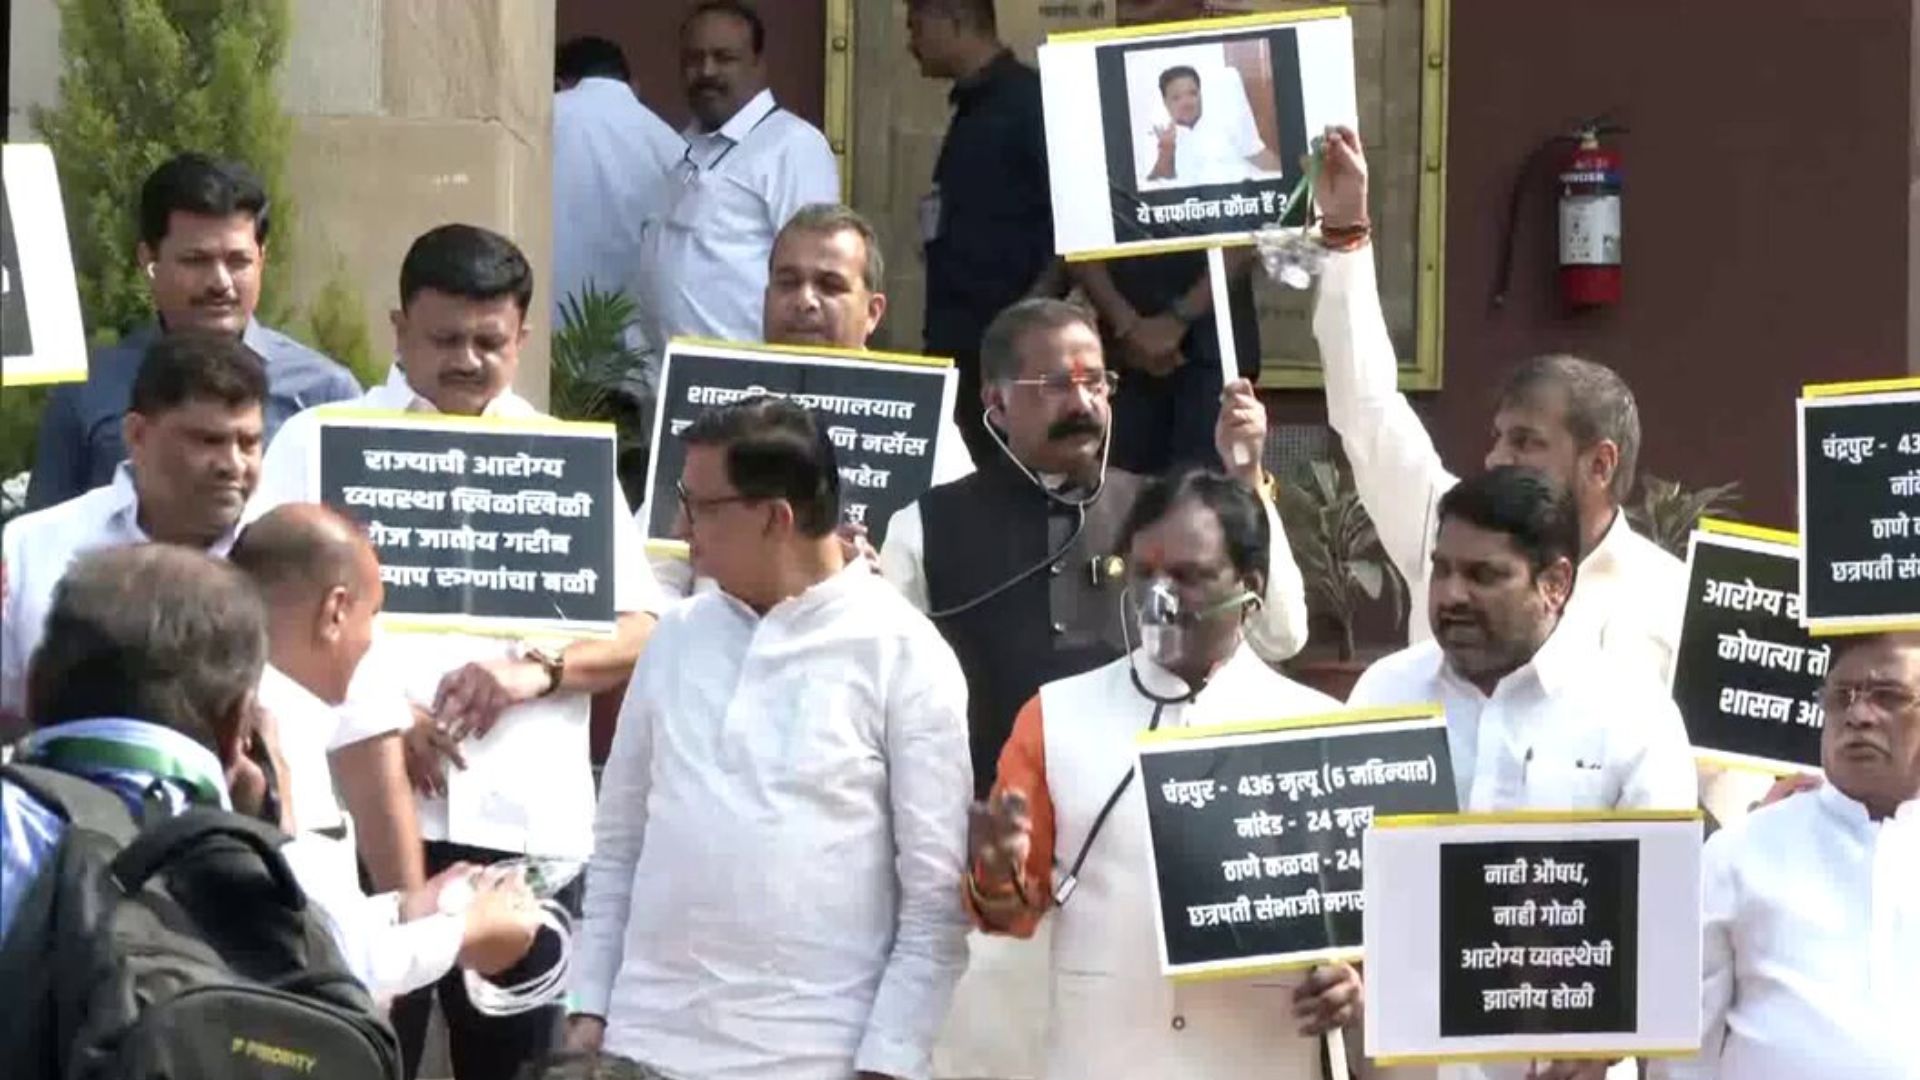 Maharashtra assembly winter session: Opposition parties stage protest against deaths in govt hospitals across state